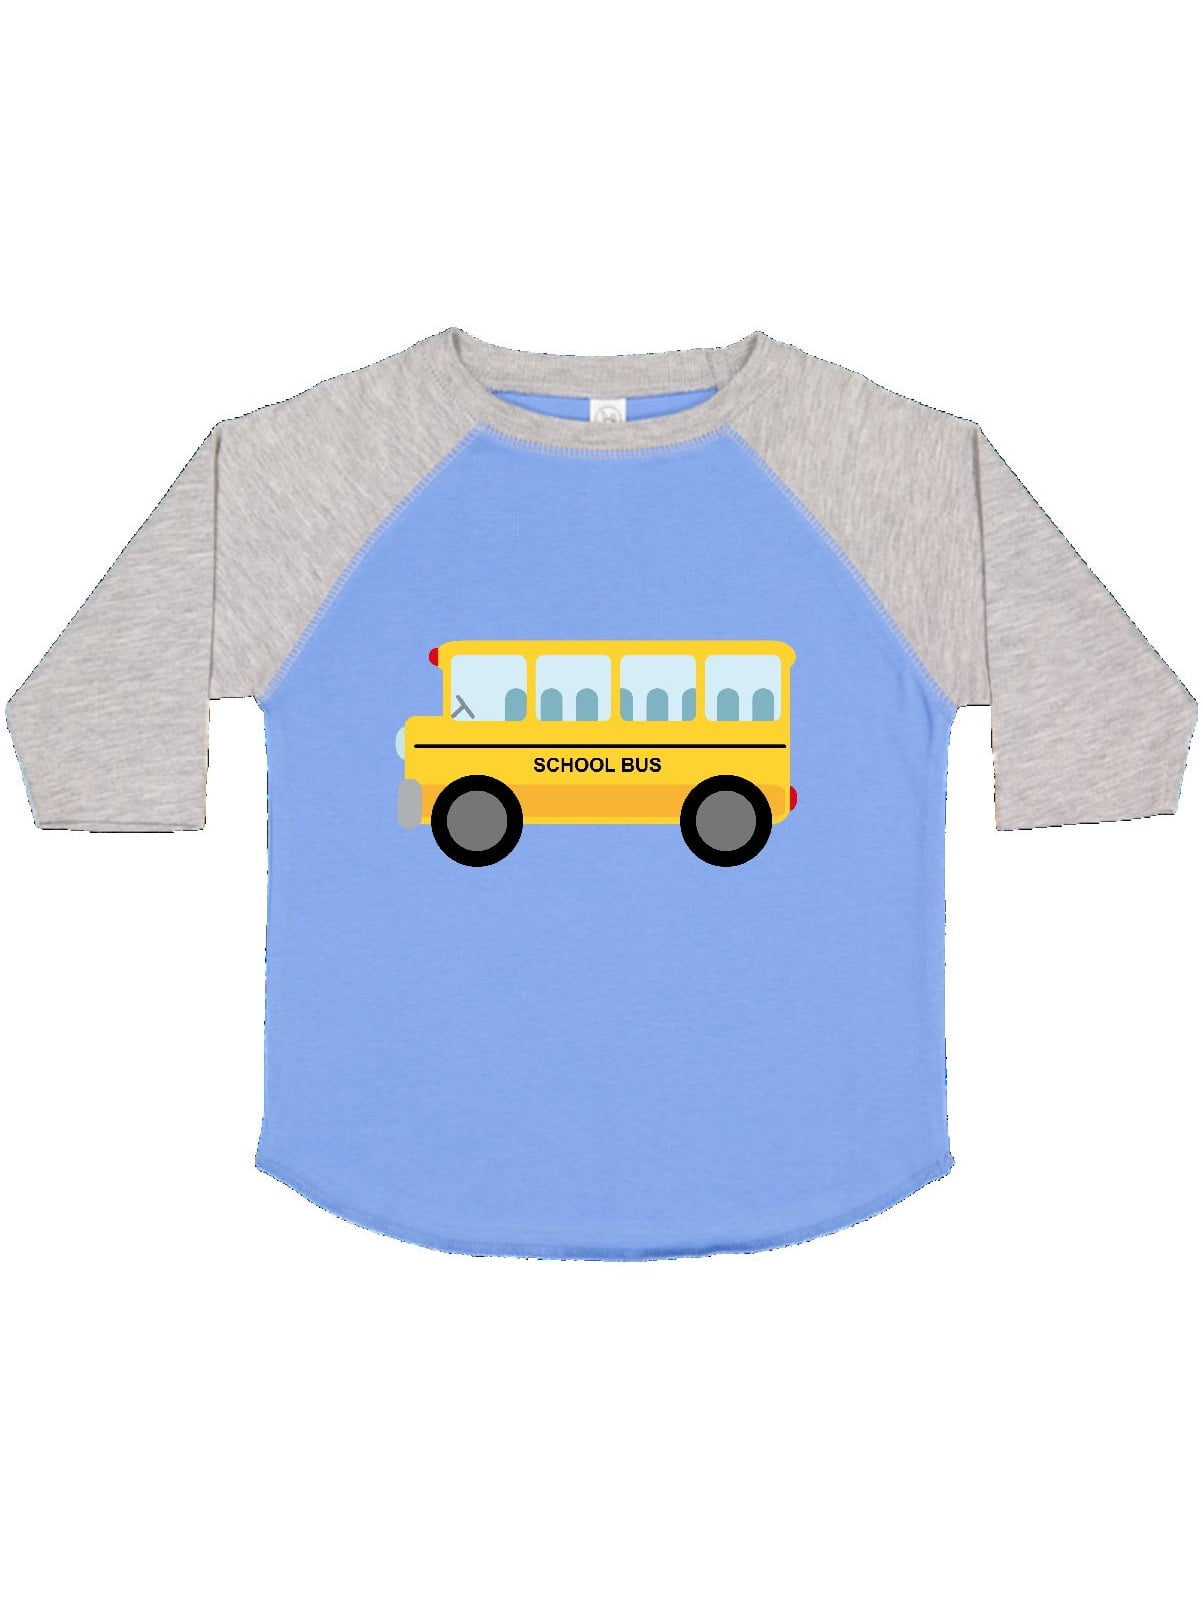 Inktastic School Bus Toddler Short Sleeve T-Shirt Unisex Blue and ...